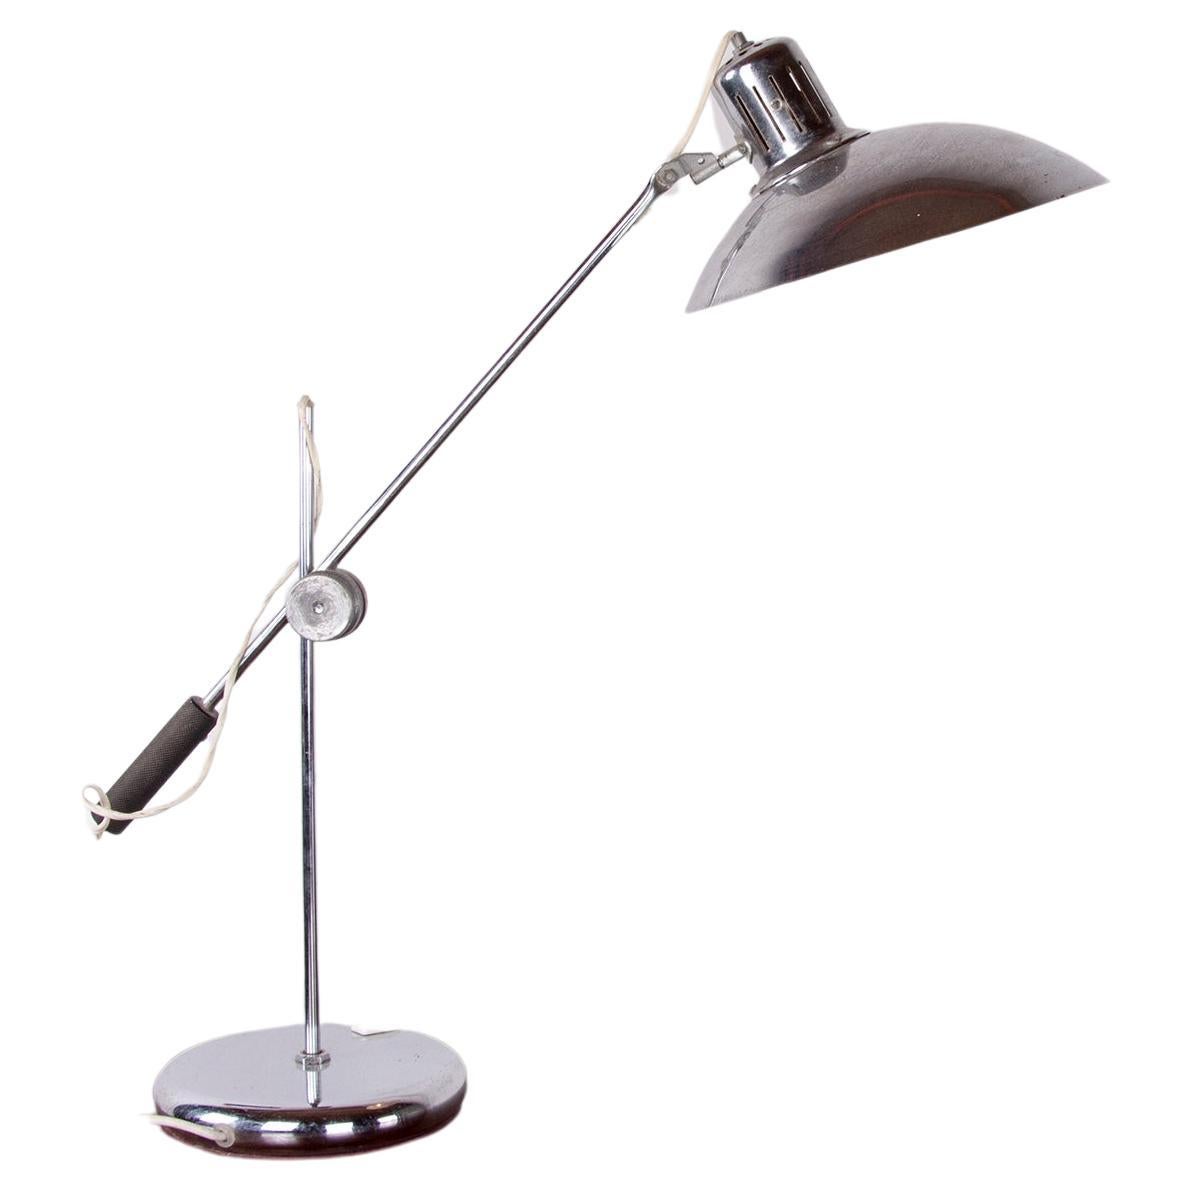 Articulated desk lamp in chrome metal by André Lavigne for Aluminor 1960.